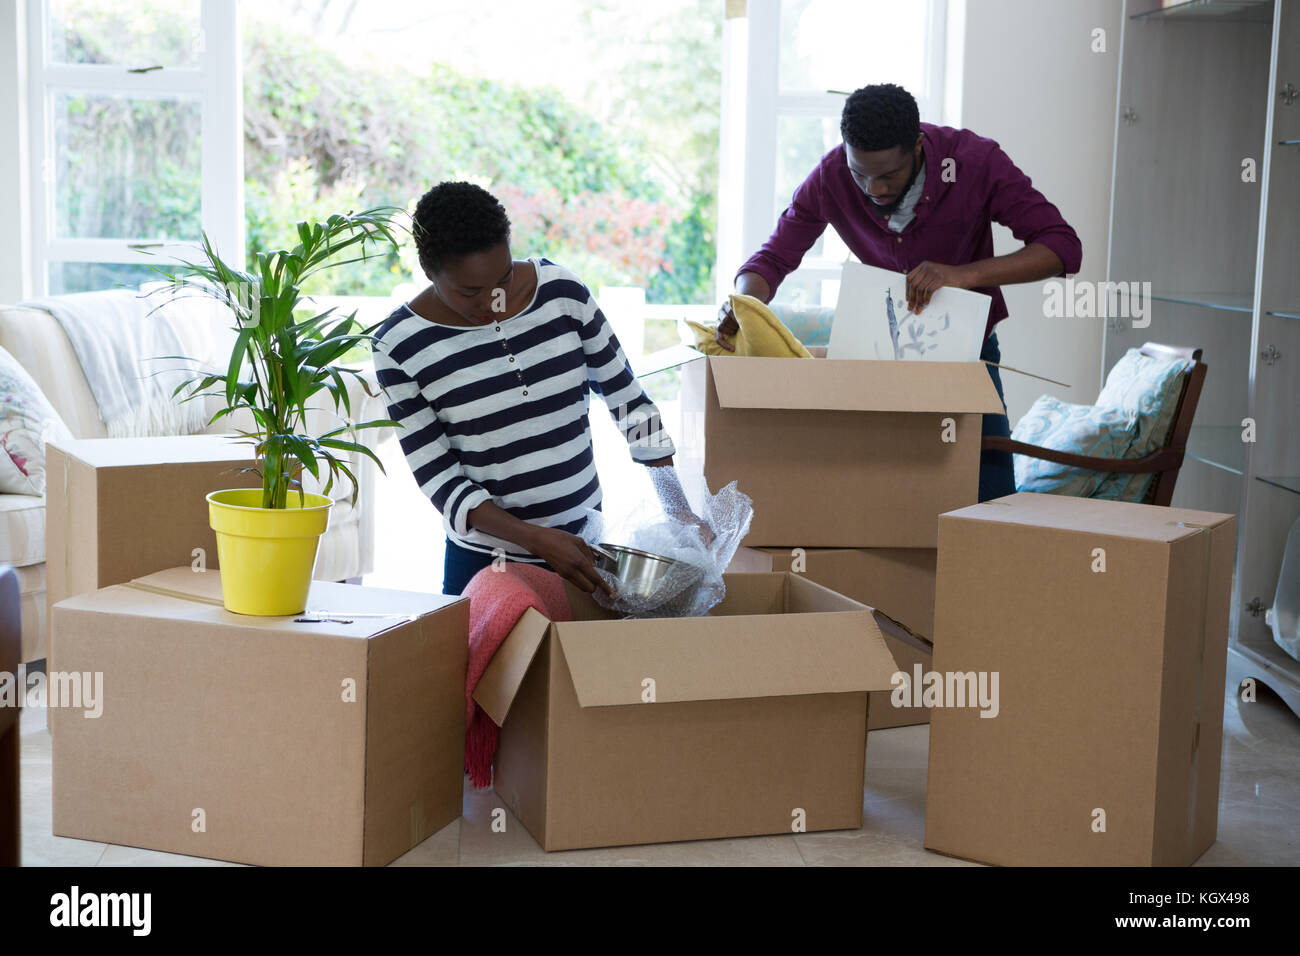 Couple unpacking boxes in new house Stock Photo